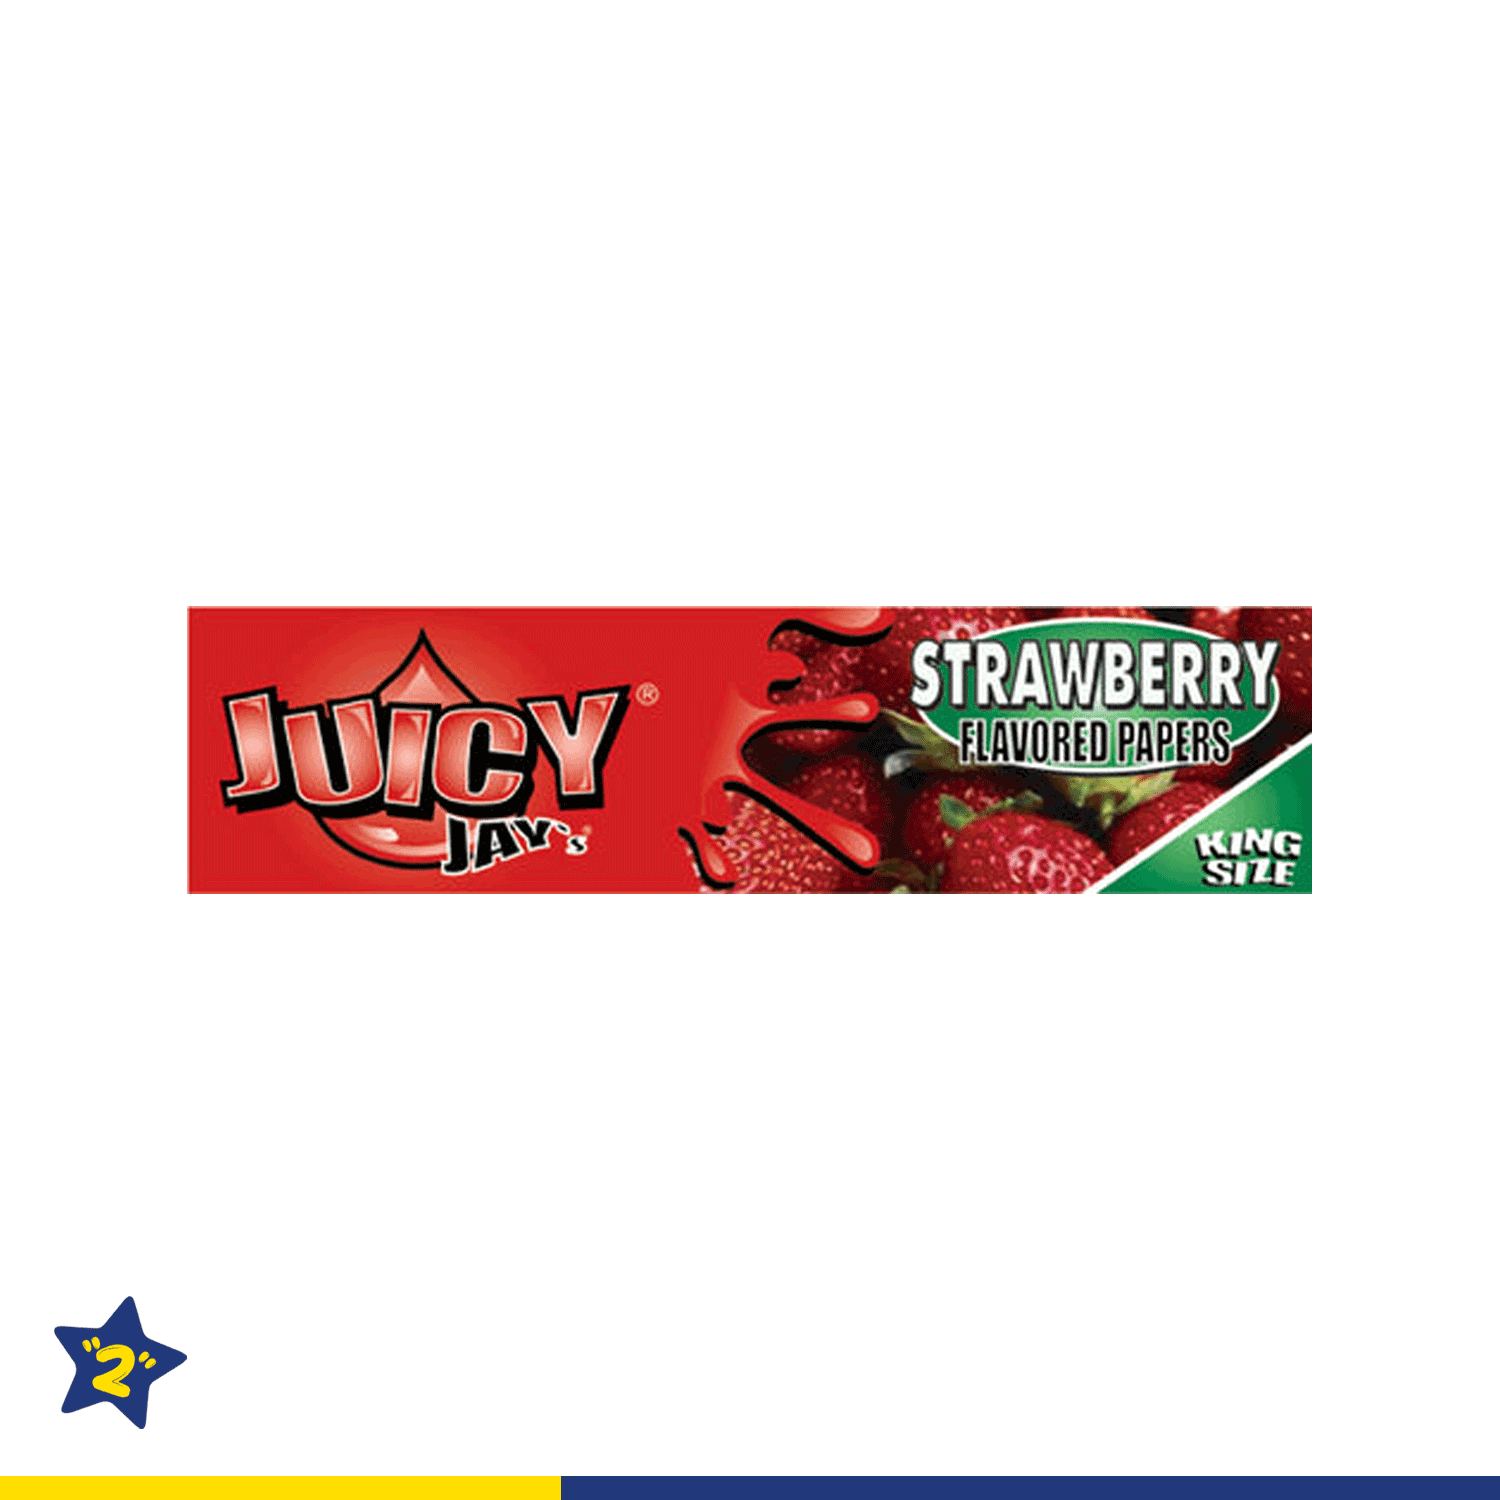 Juicy Jay's Rolling Paper strawberry